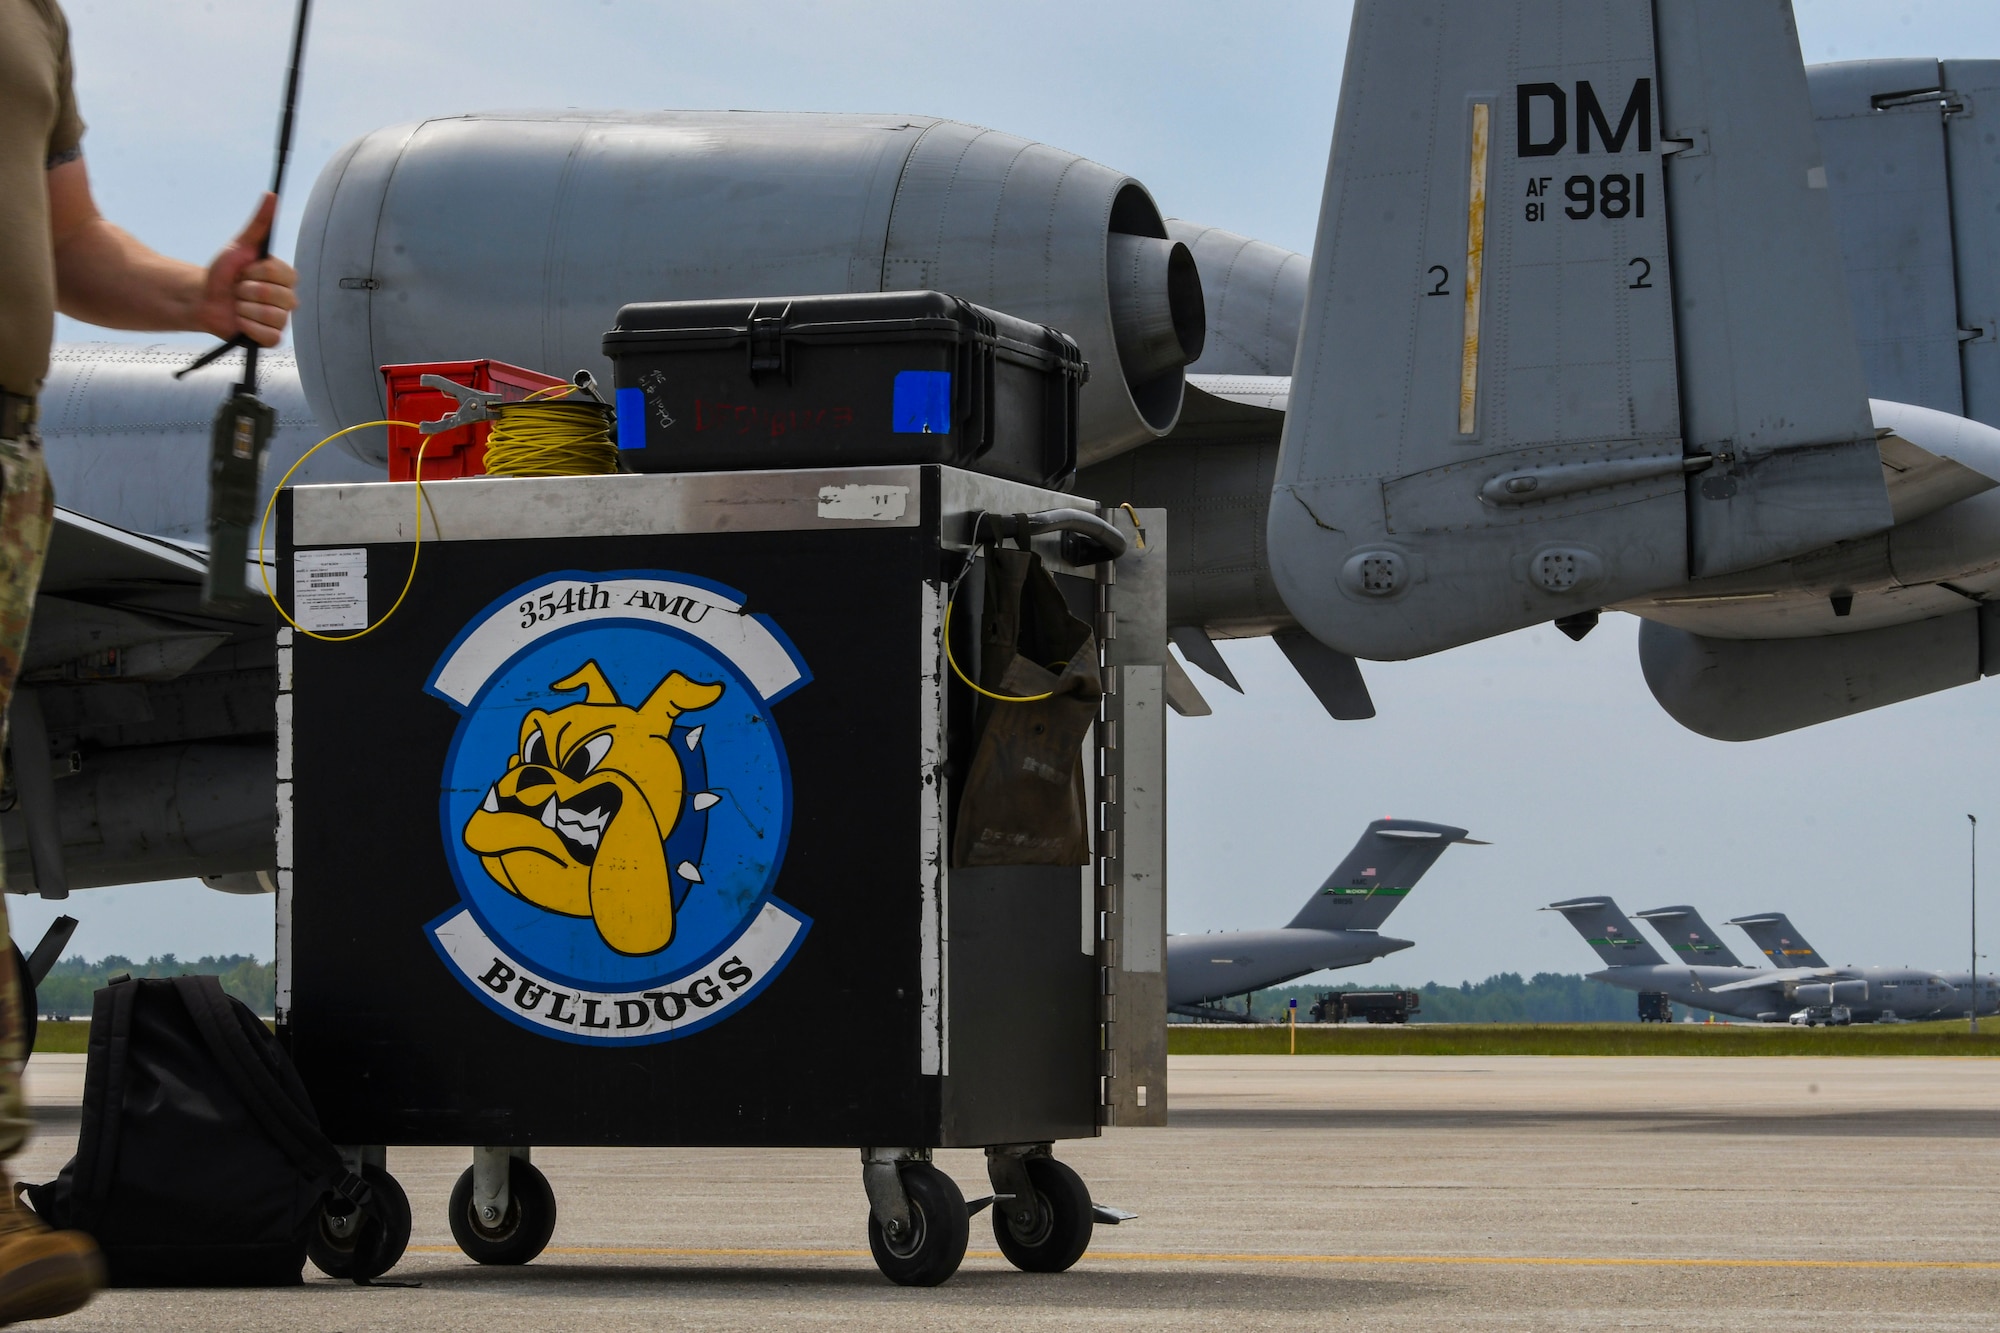 A photo of a tool box sitting on a flight line